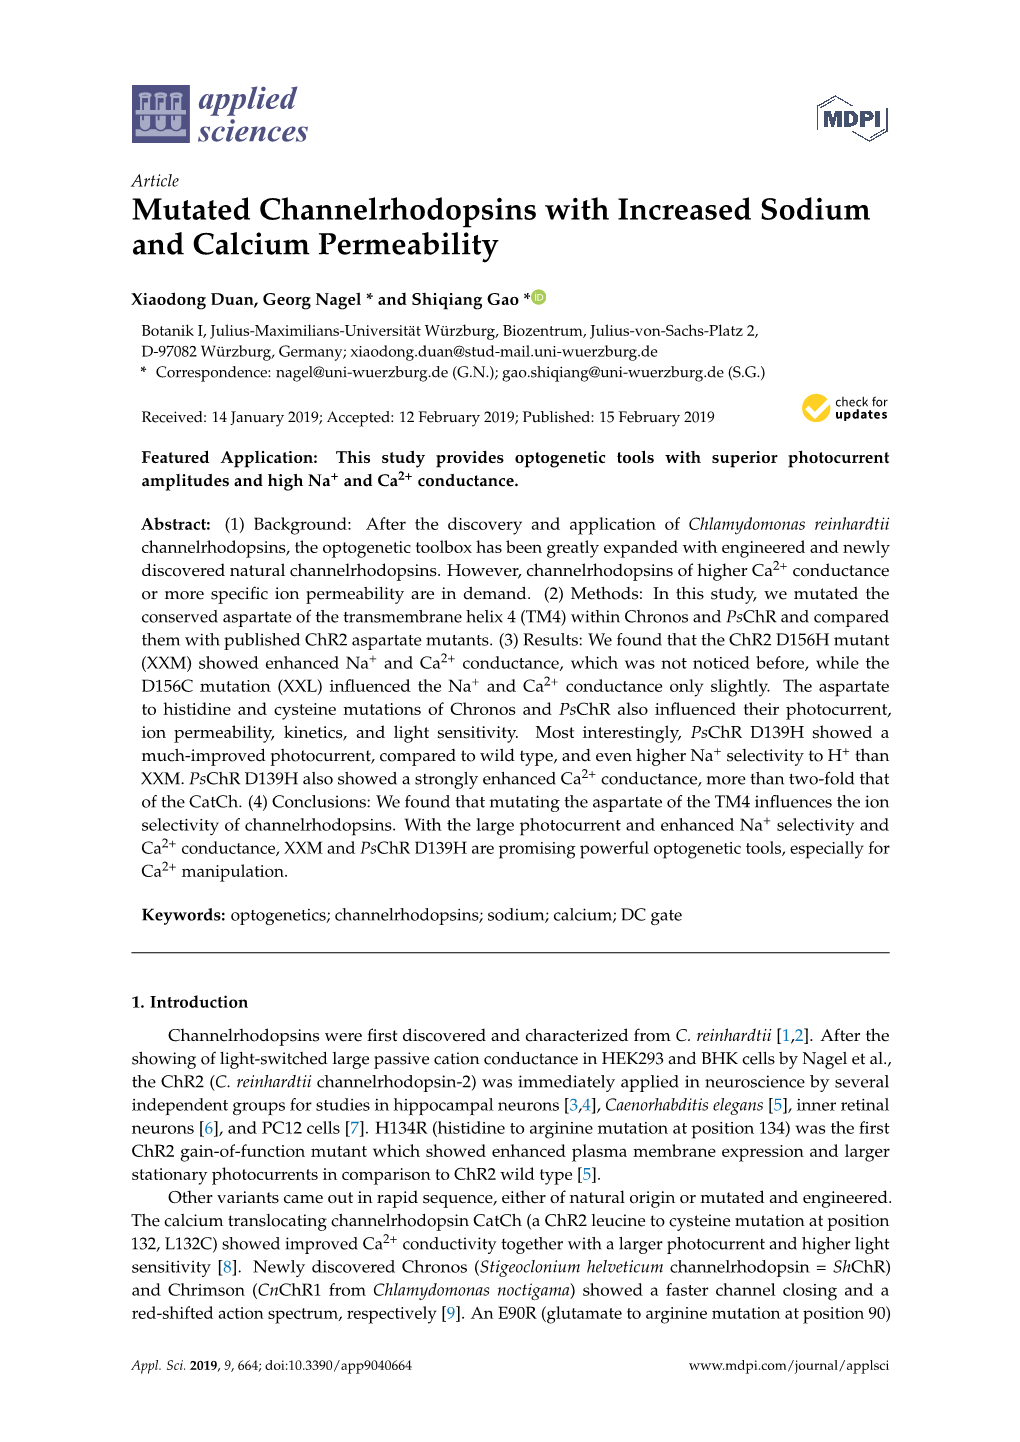 Mutated Channelrhodopsins with Increased Sodium and Calcium Permeability